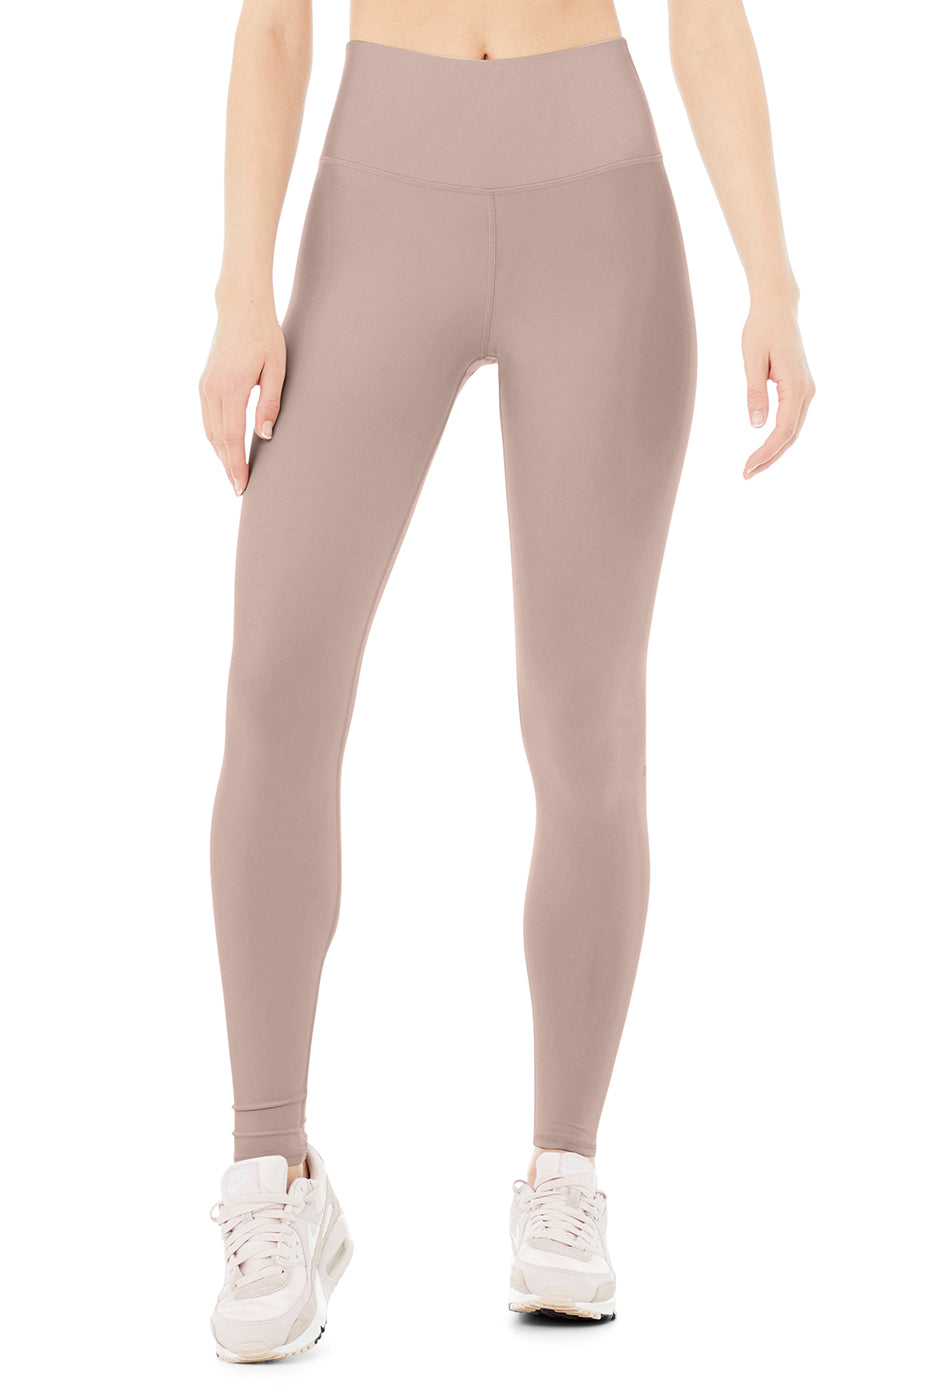 Airlift high-rise leggings in pink - Alo Yoga